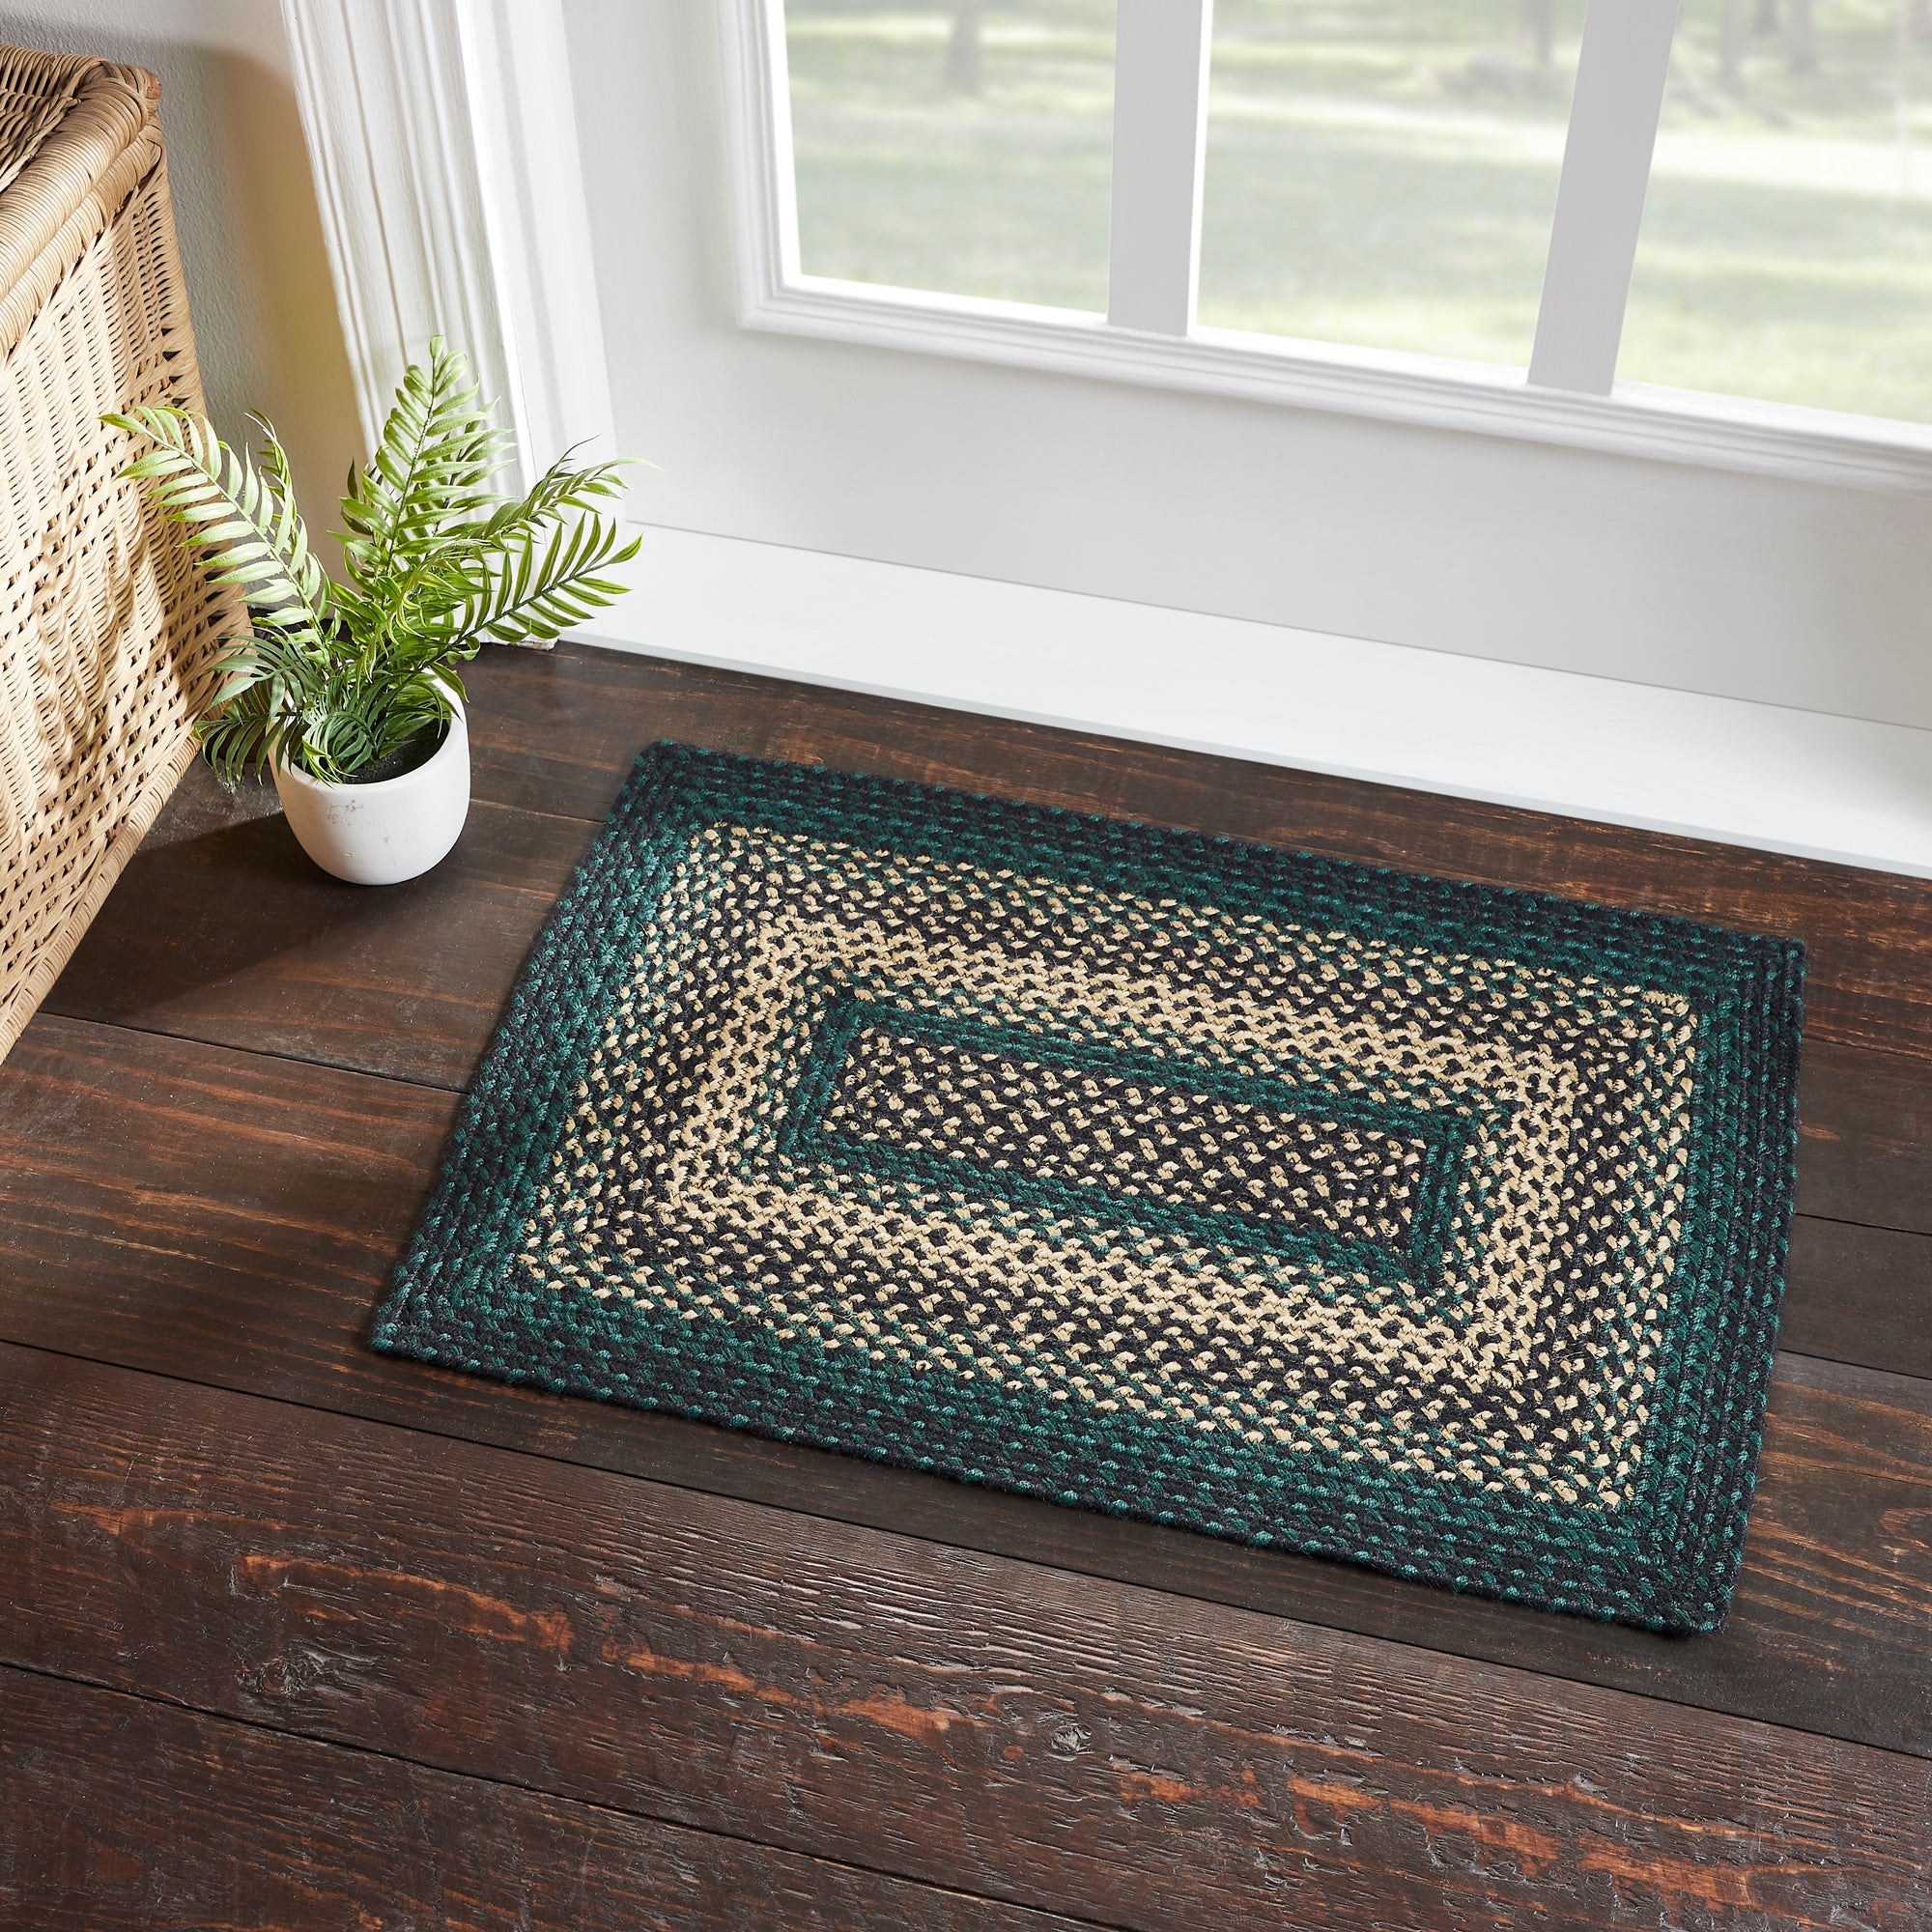 Pine Grove Jute Braided Rug Rect. with Rug Pad 20"x30" VHC Brands